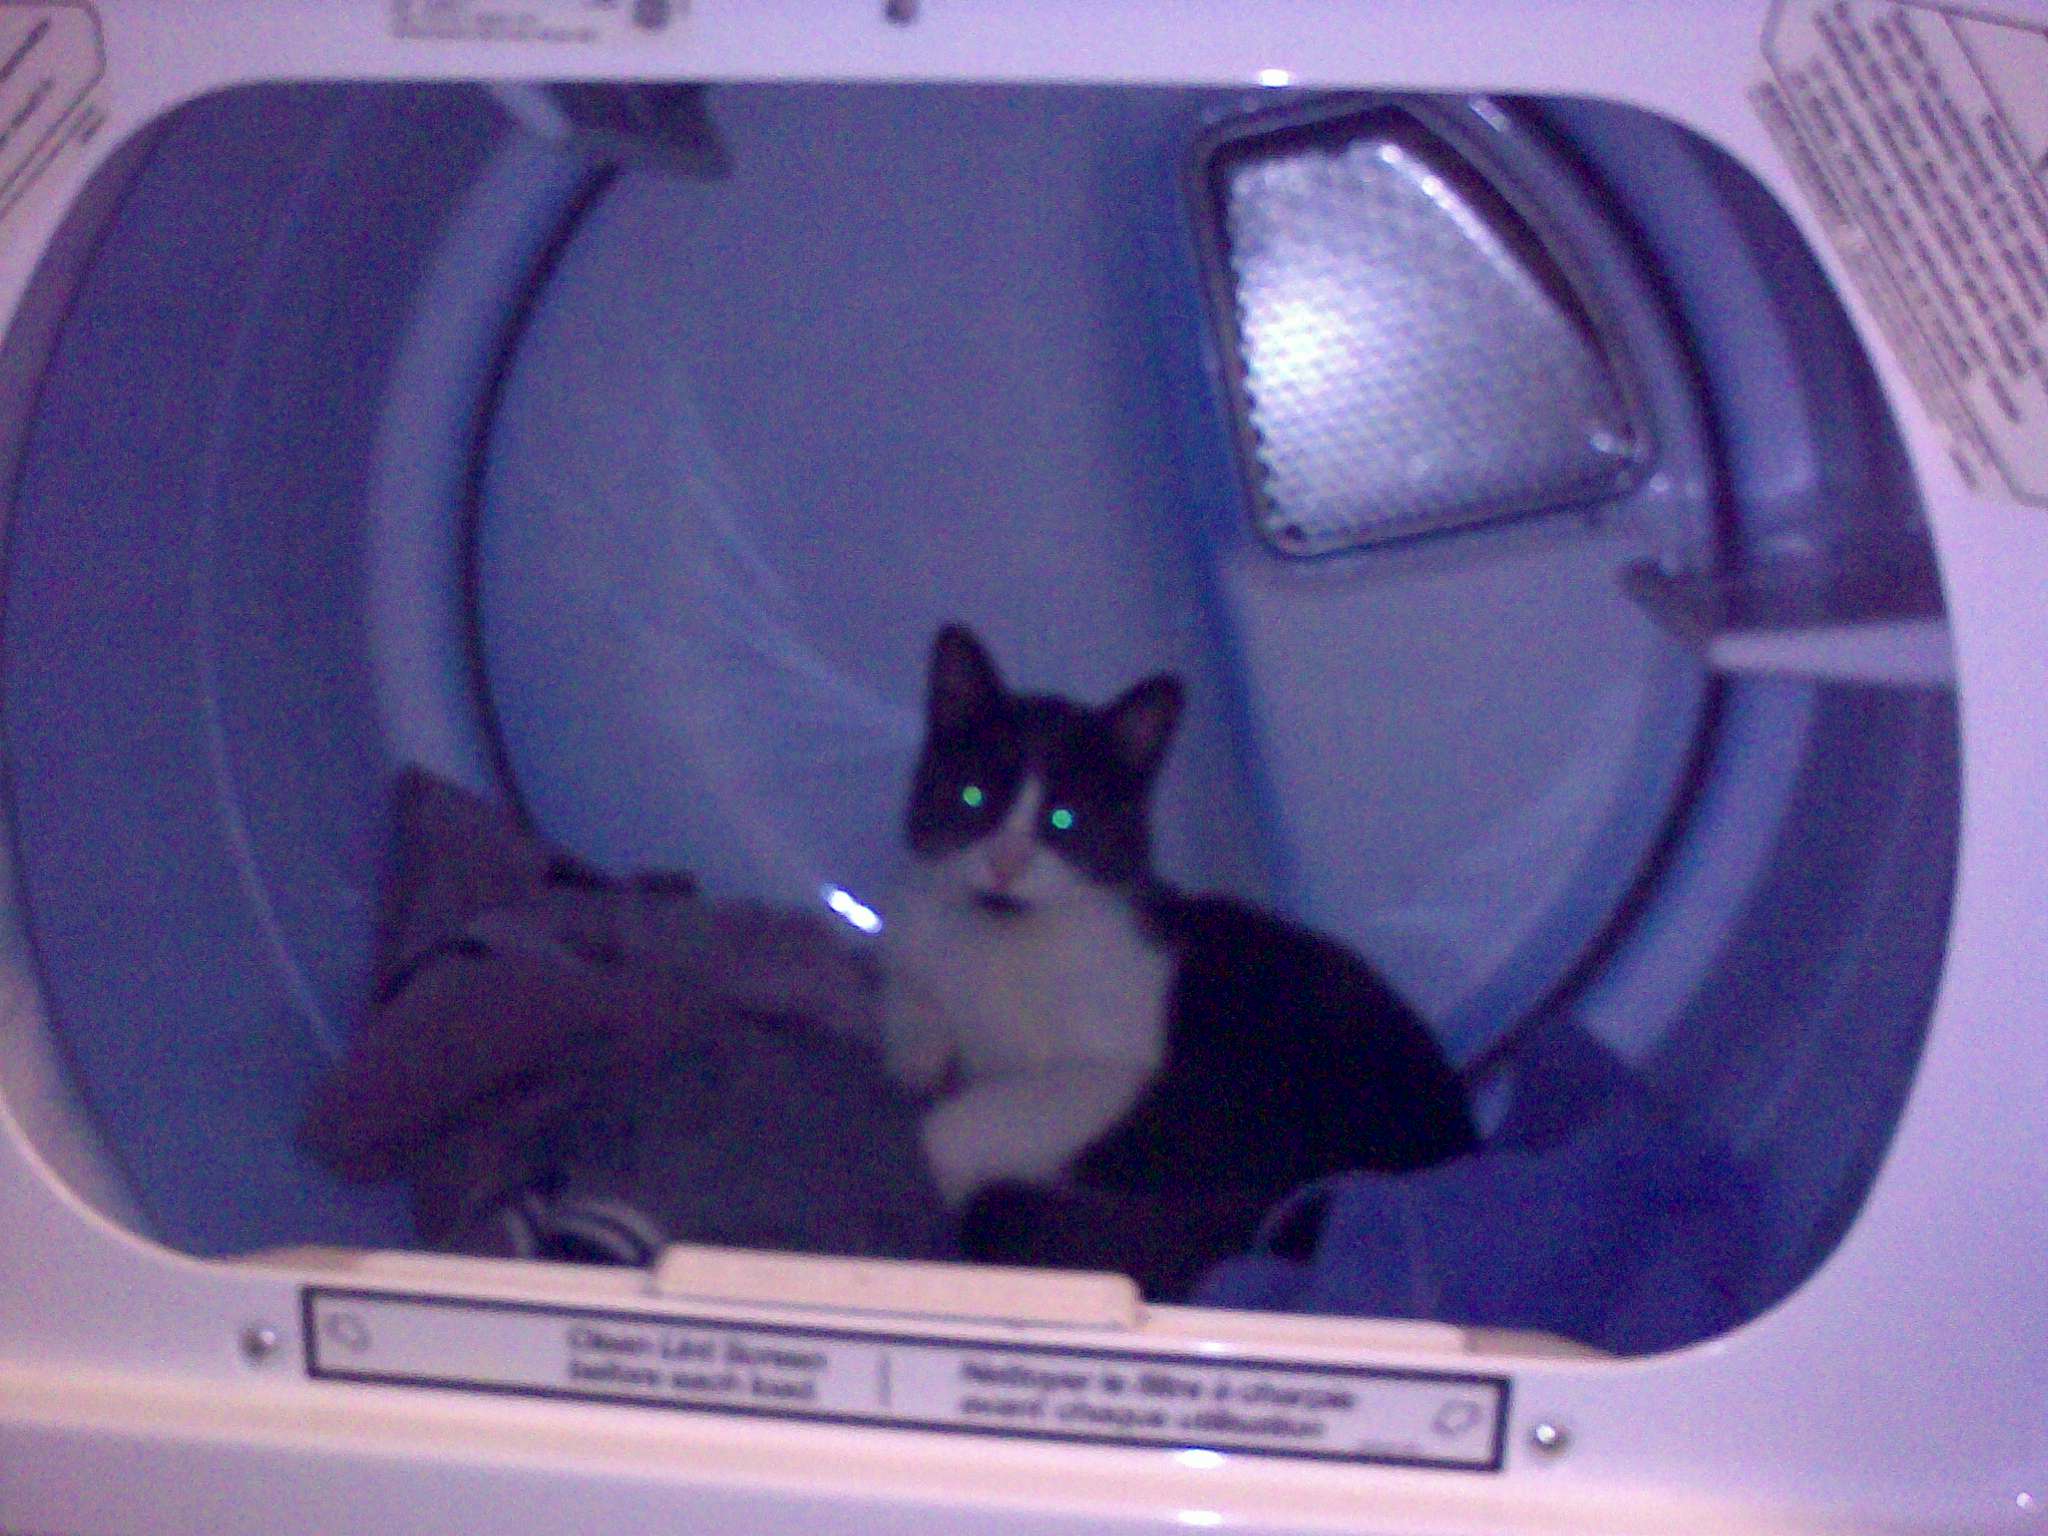 a black and white cat in the back of a washer